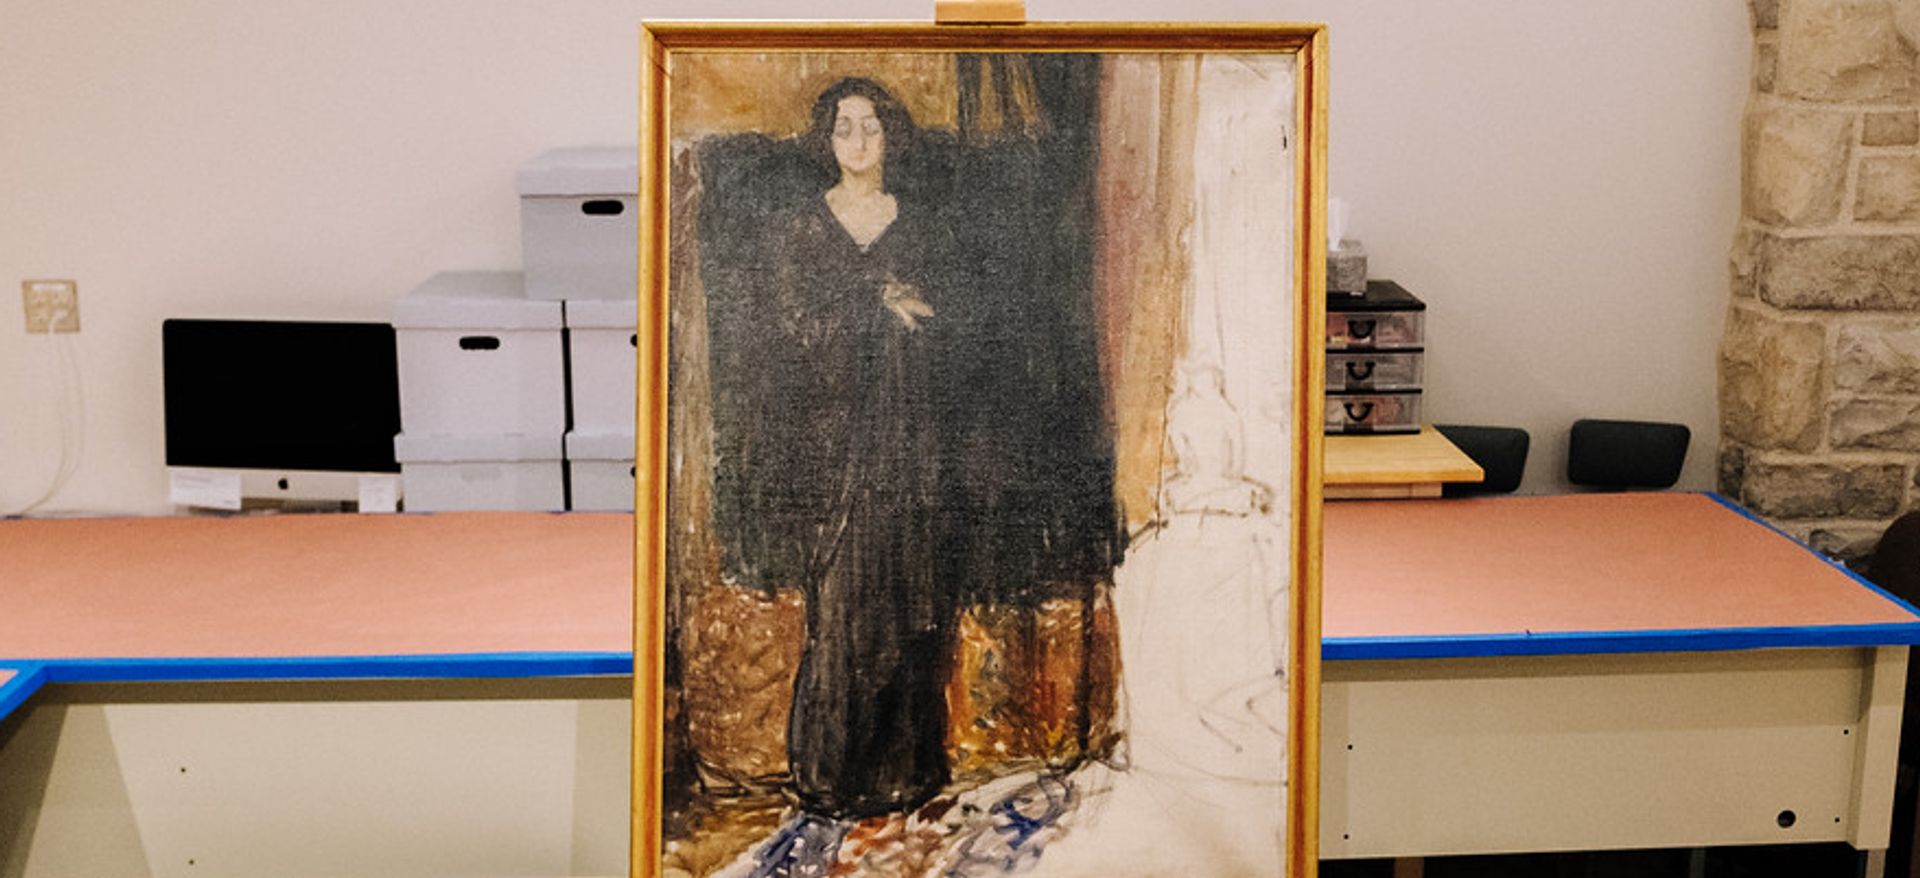 St Olaf College's unfinished Portrait of Eva Mudocci, attributed to Edvard Munch Photo: © Steven Garcia